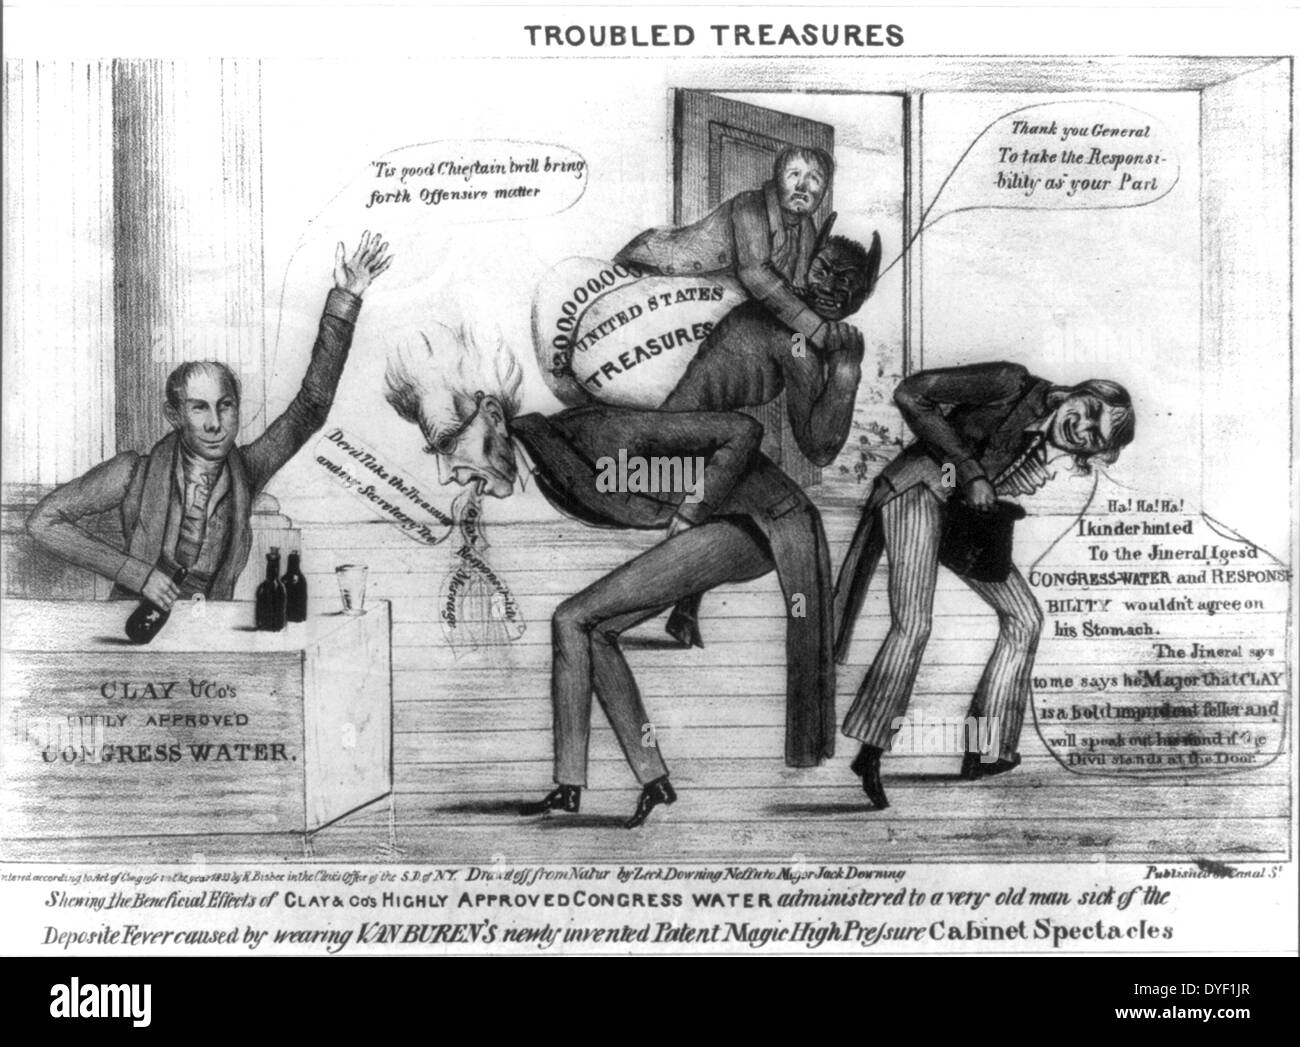 Troubled treasures by R. Bisbee, circa 1833. Political cartoon expressing anti-Jackson views and supporting Henry Clay's part in Congressional resistance to his plans involving treasury money. Stock Photo